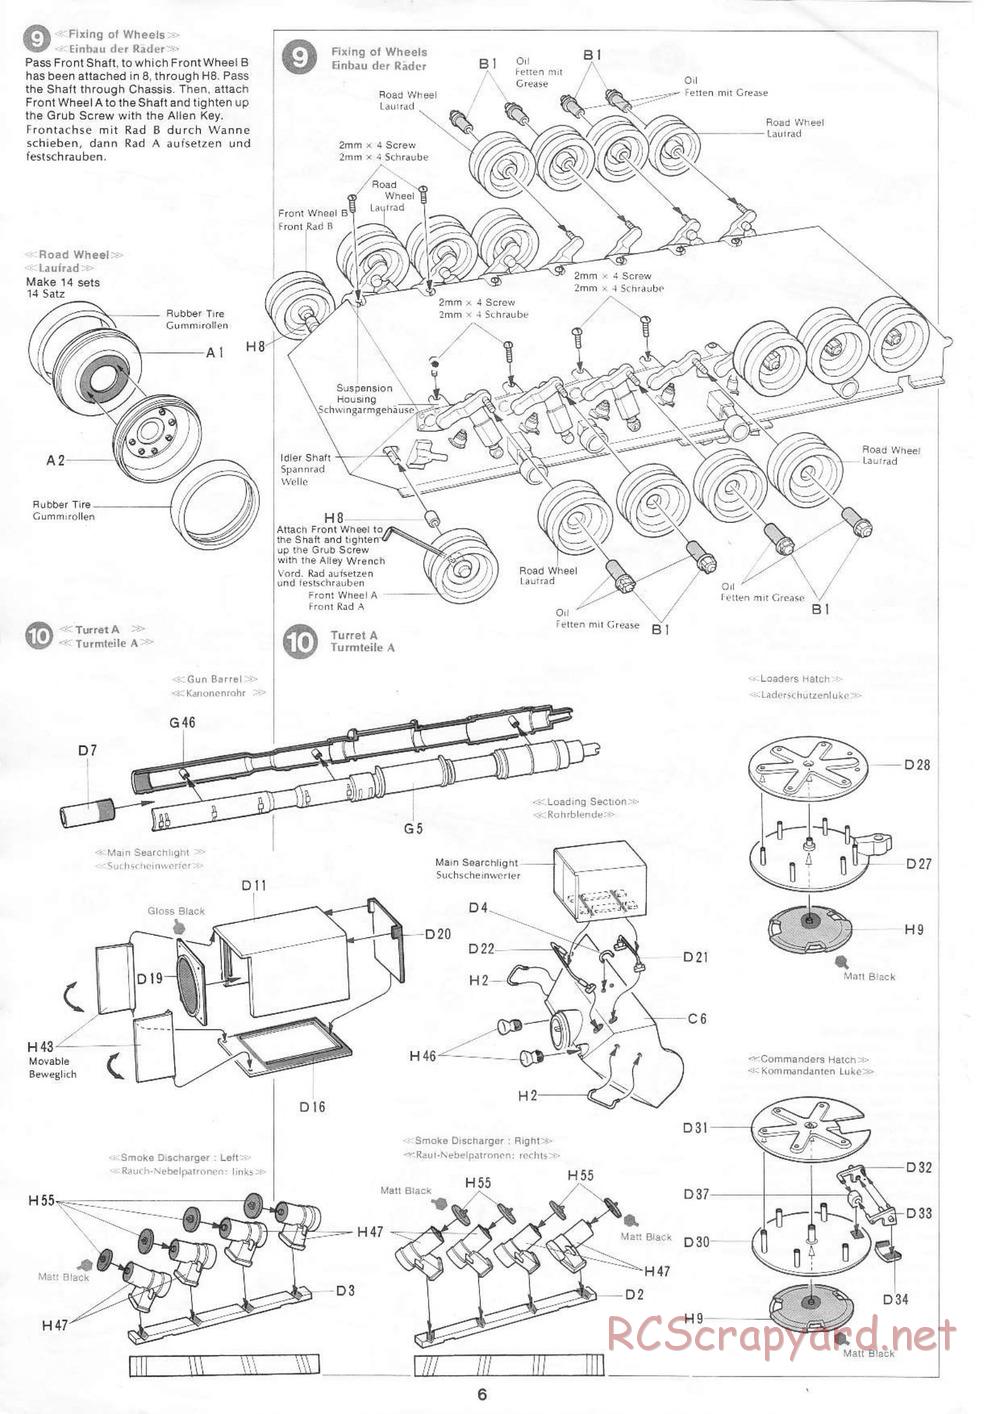 Tamiya - Leopard A4 - 1/16 Scale Chassis - Manual - Page 6